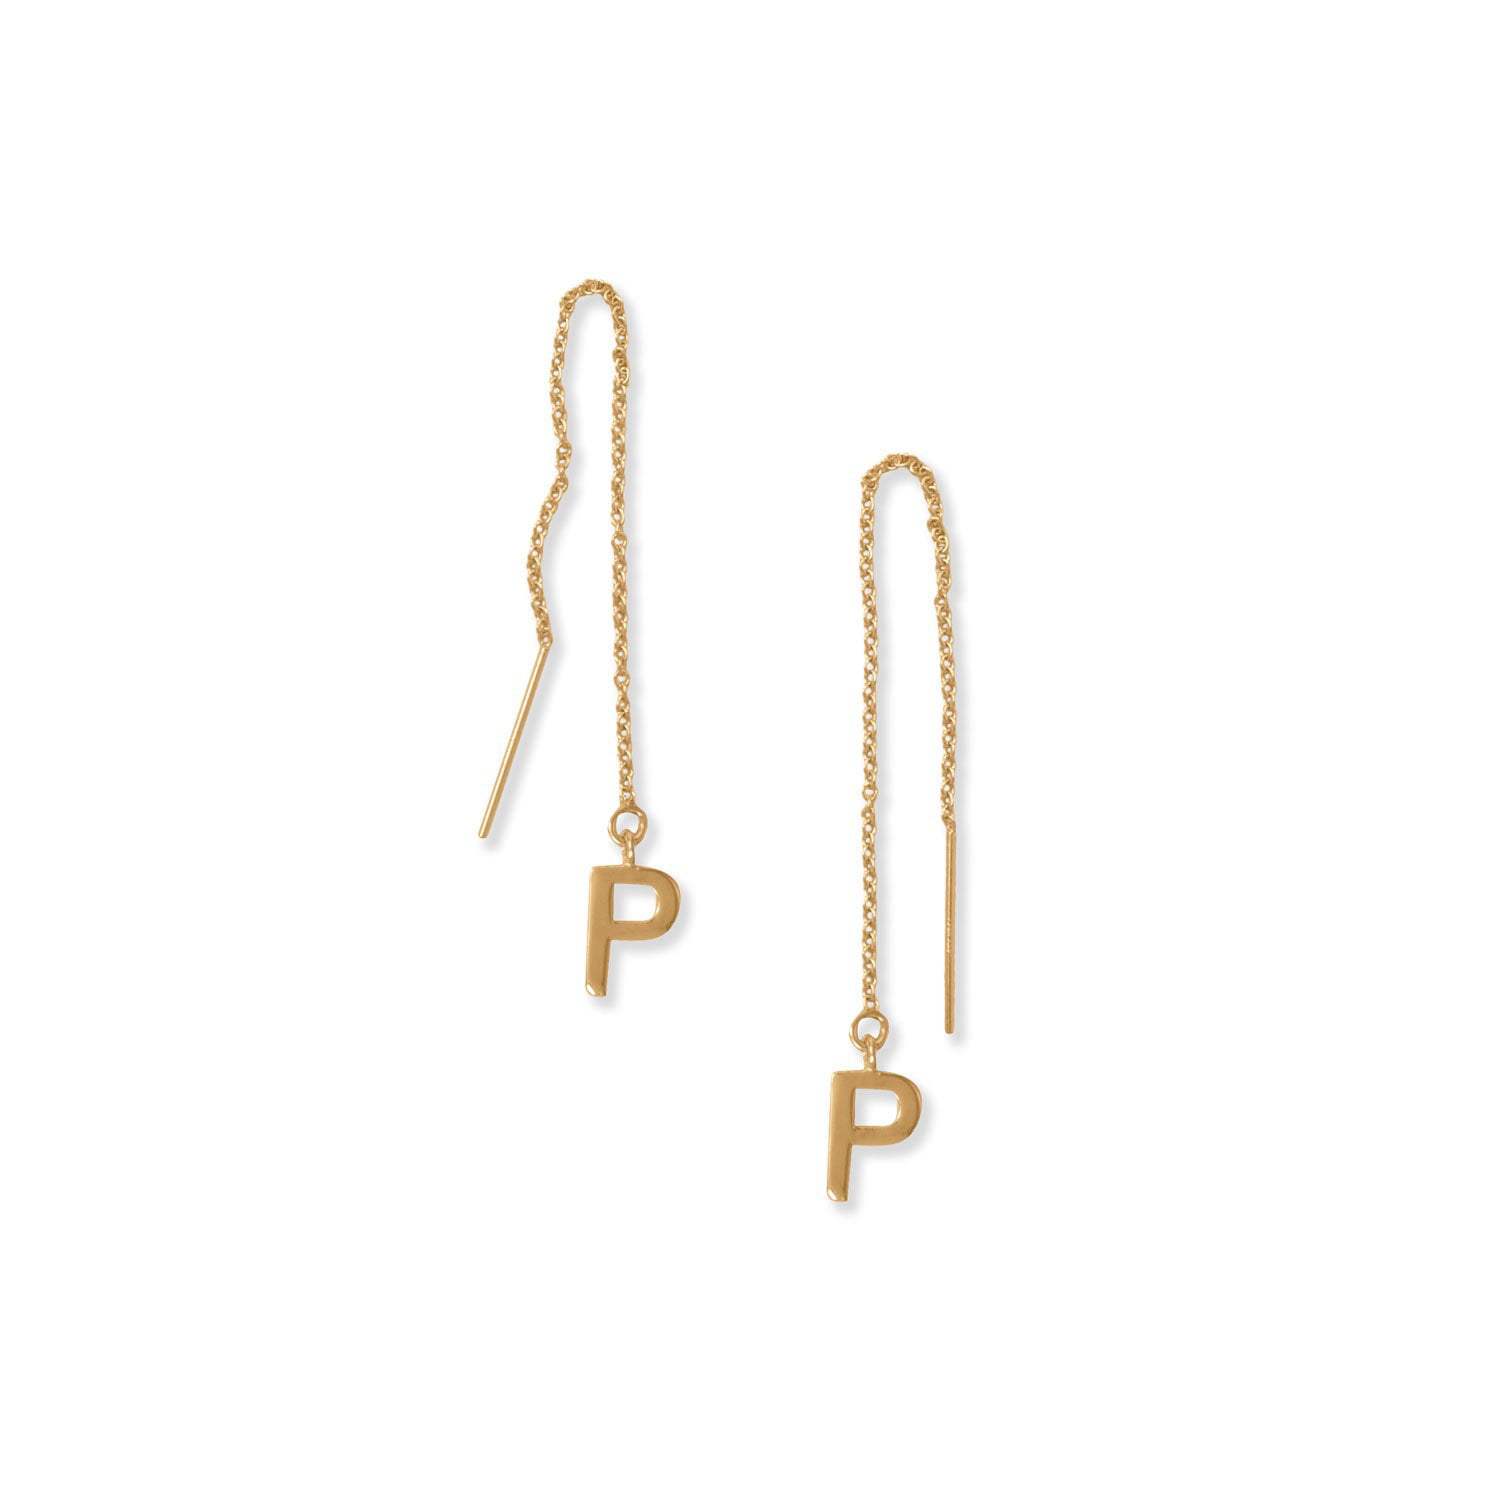 Sterling SilverGold Plated Bars with Cubic Zirconium Gemstones on Sterling Silver or 14k Gold Filled Ear Threaders